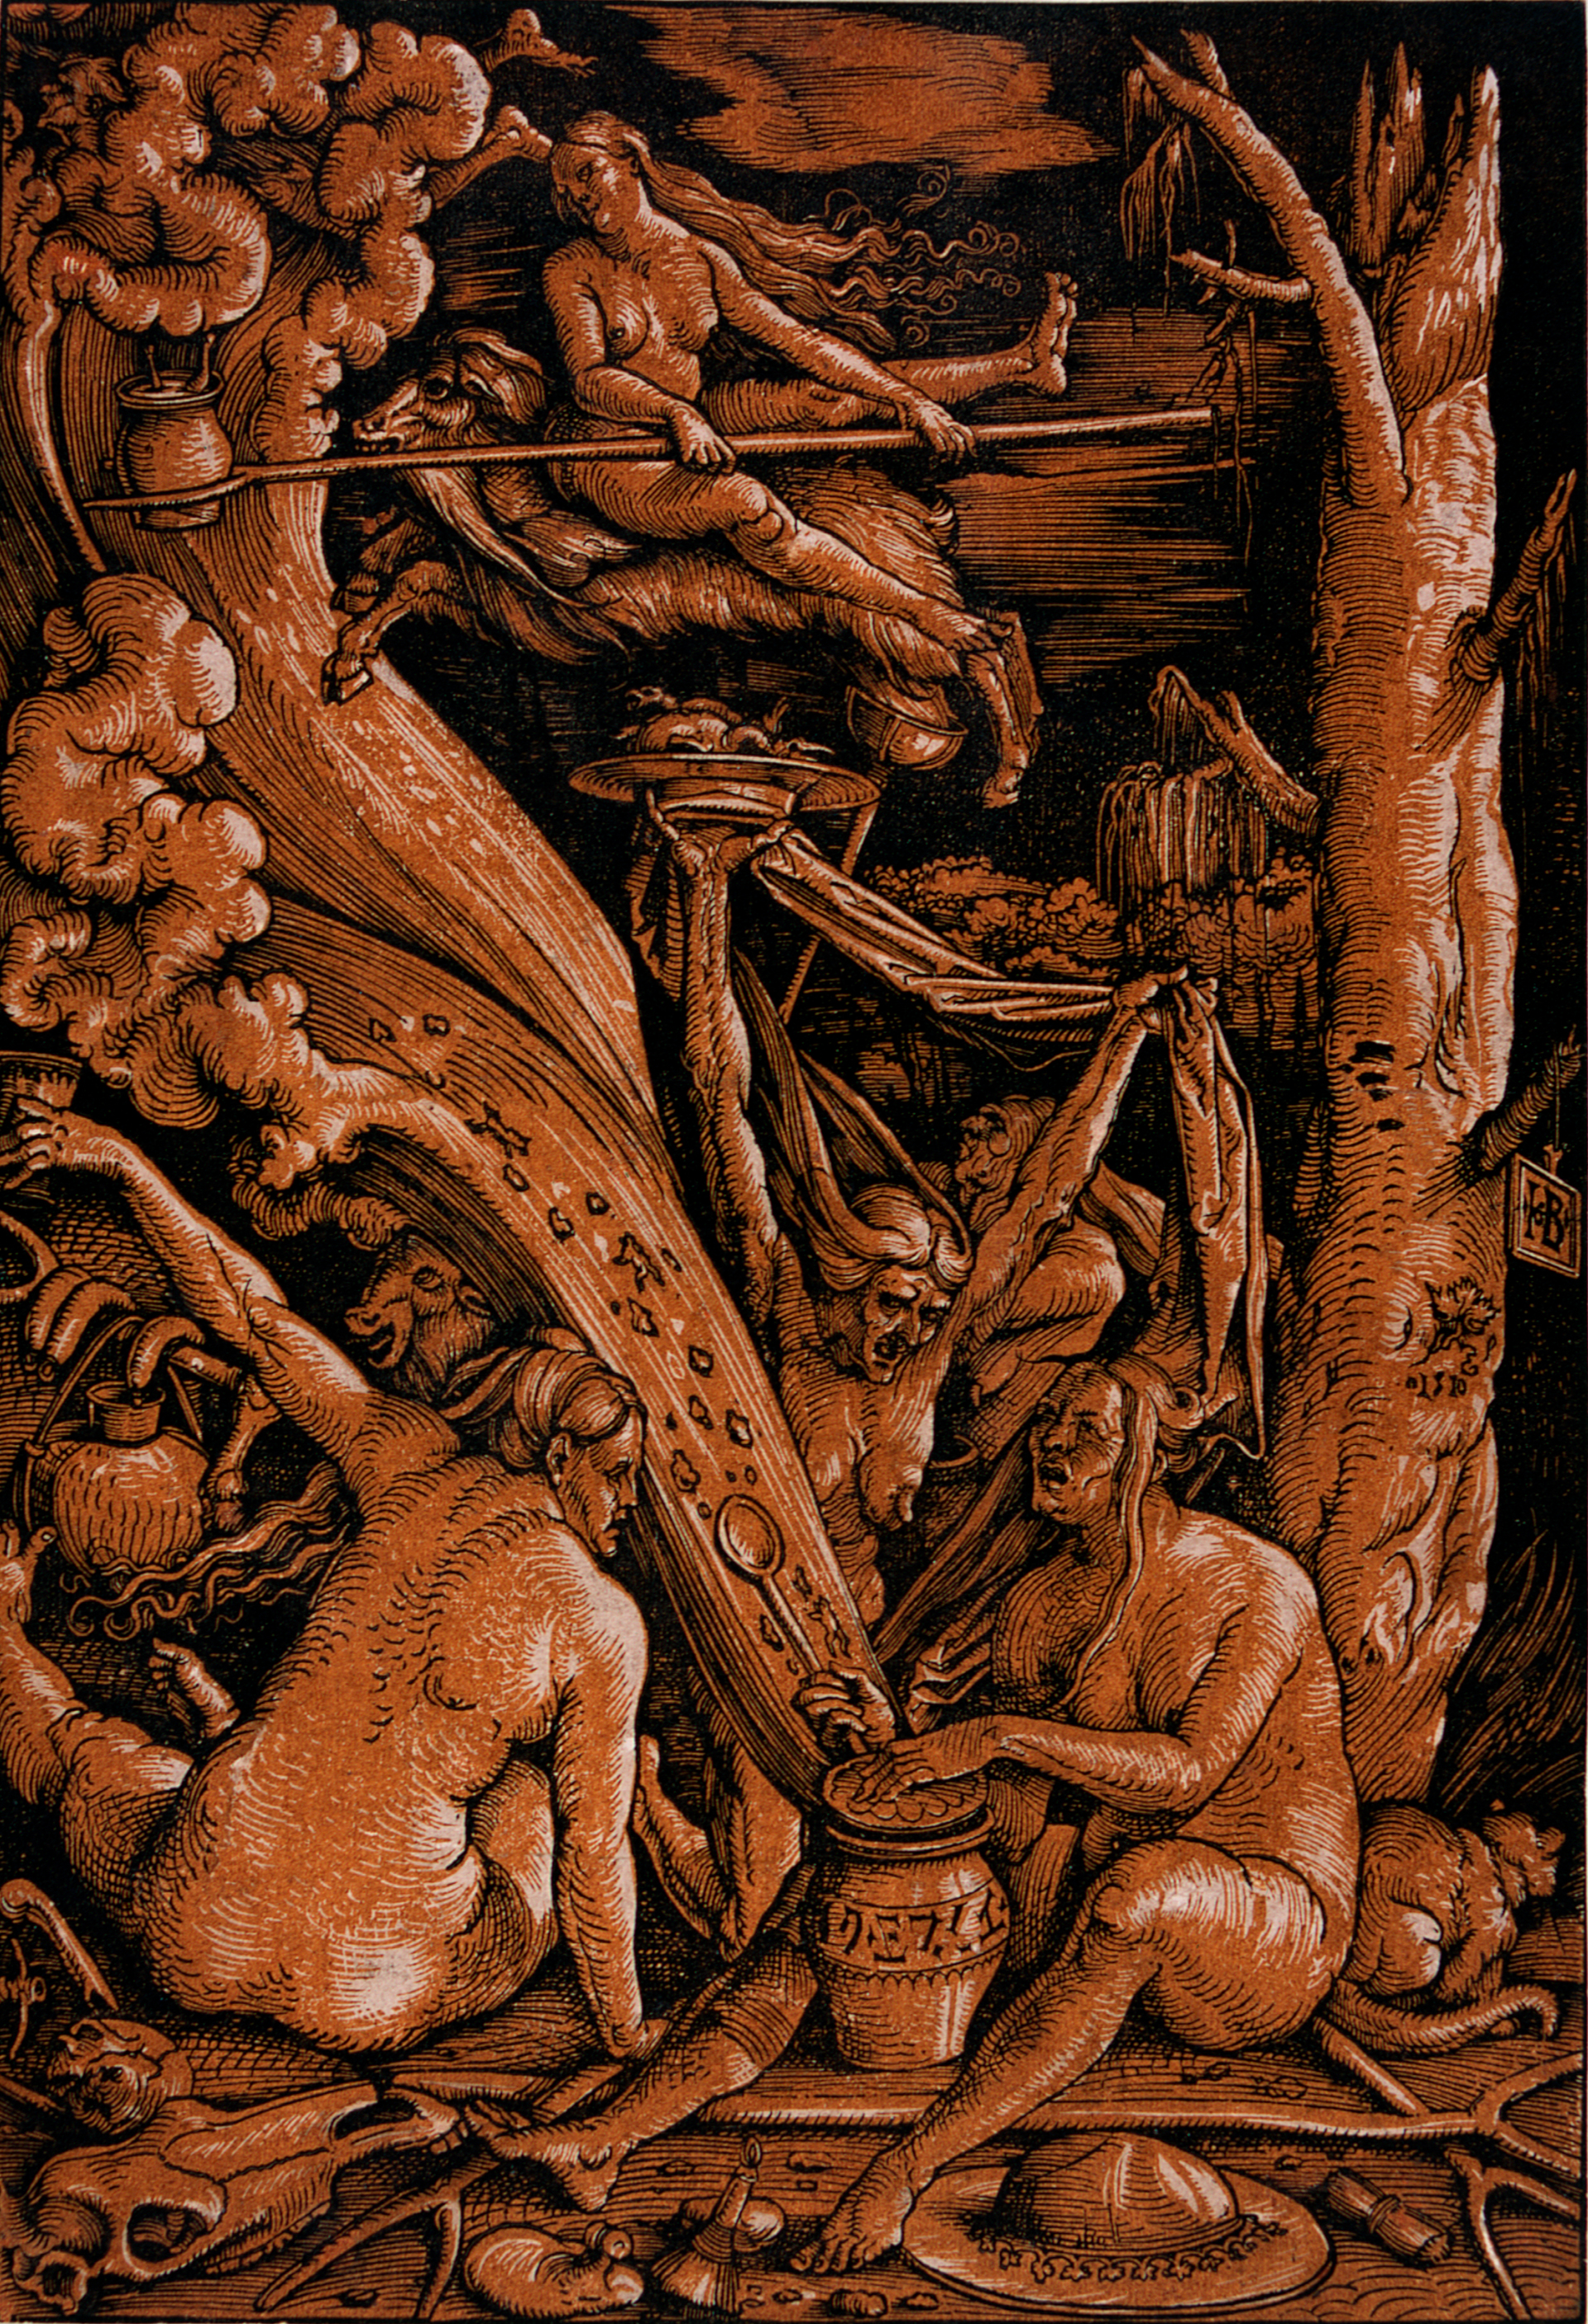 Image of the clair obscure wood Witches by Hans Baldung Grien from 1510. lent by Stiftung Schloss Friedenstein Gotha.